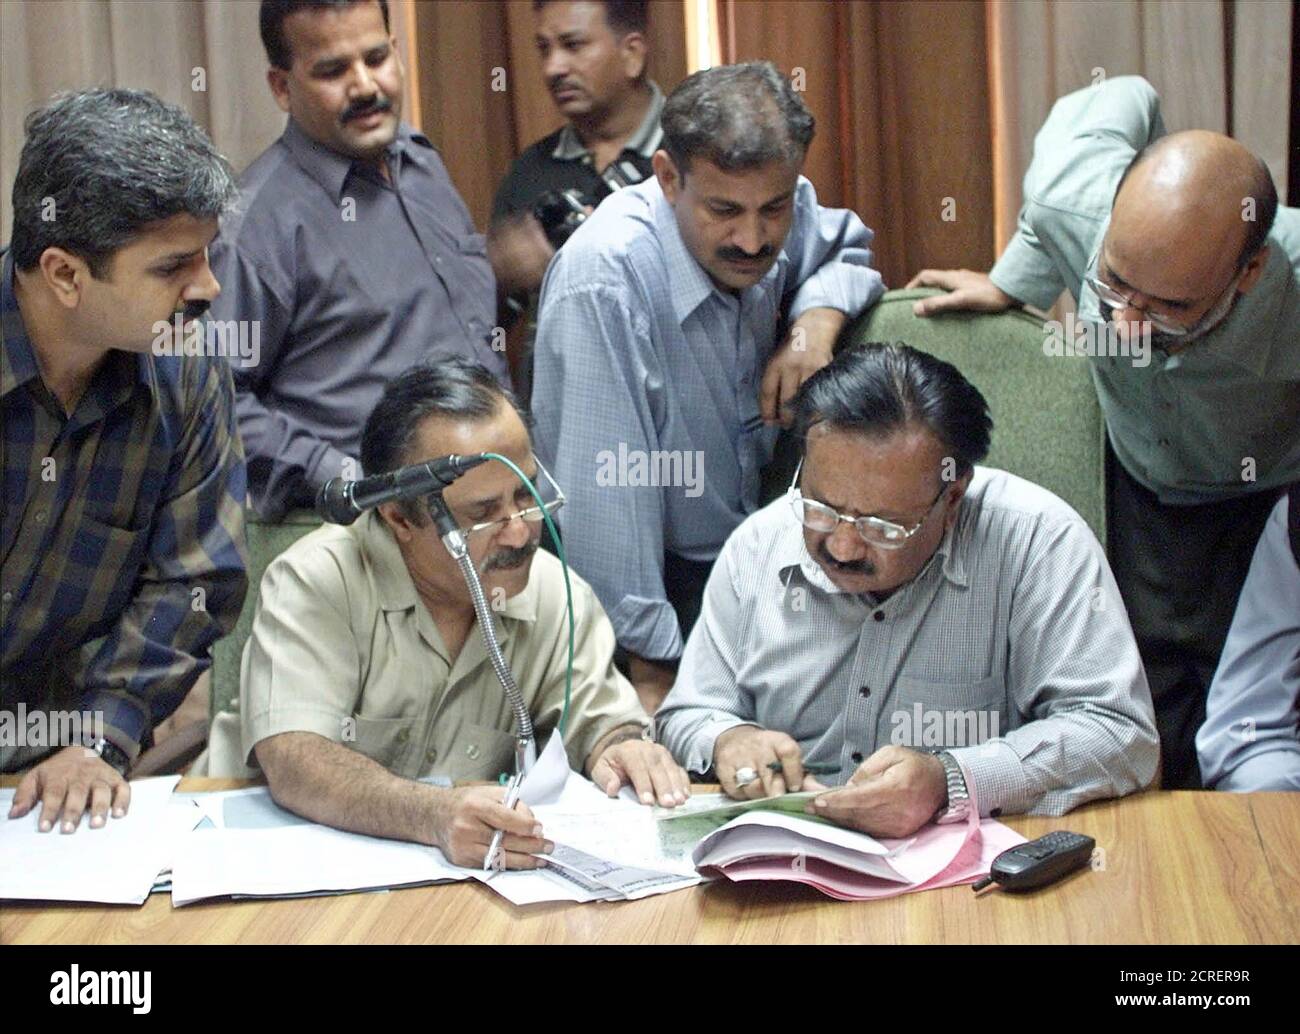 Election officials scrutinize nomination papers in Karachi on August 28, 2002. Scrutiny of nominations papers filed by candidates hoping to contest October 10 elections continued for a second day and will end on September 2. REUTERS/Zahid Hussein  ZH/JD Stock Photo